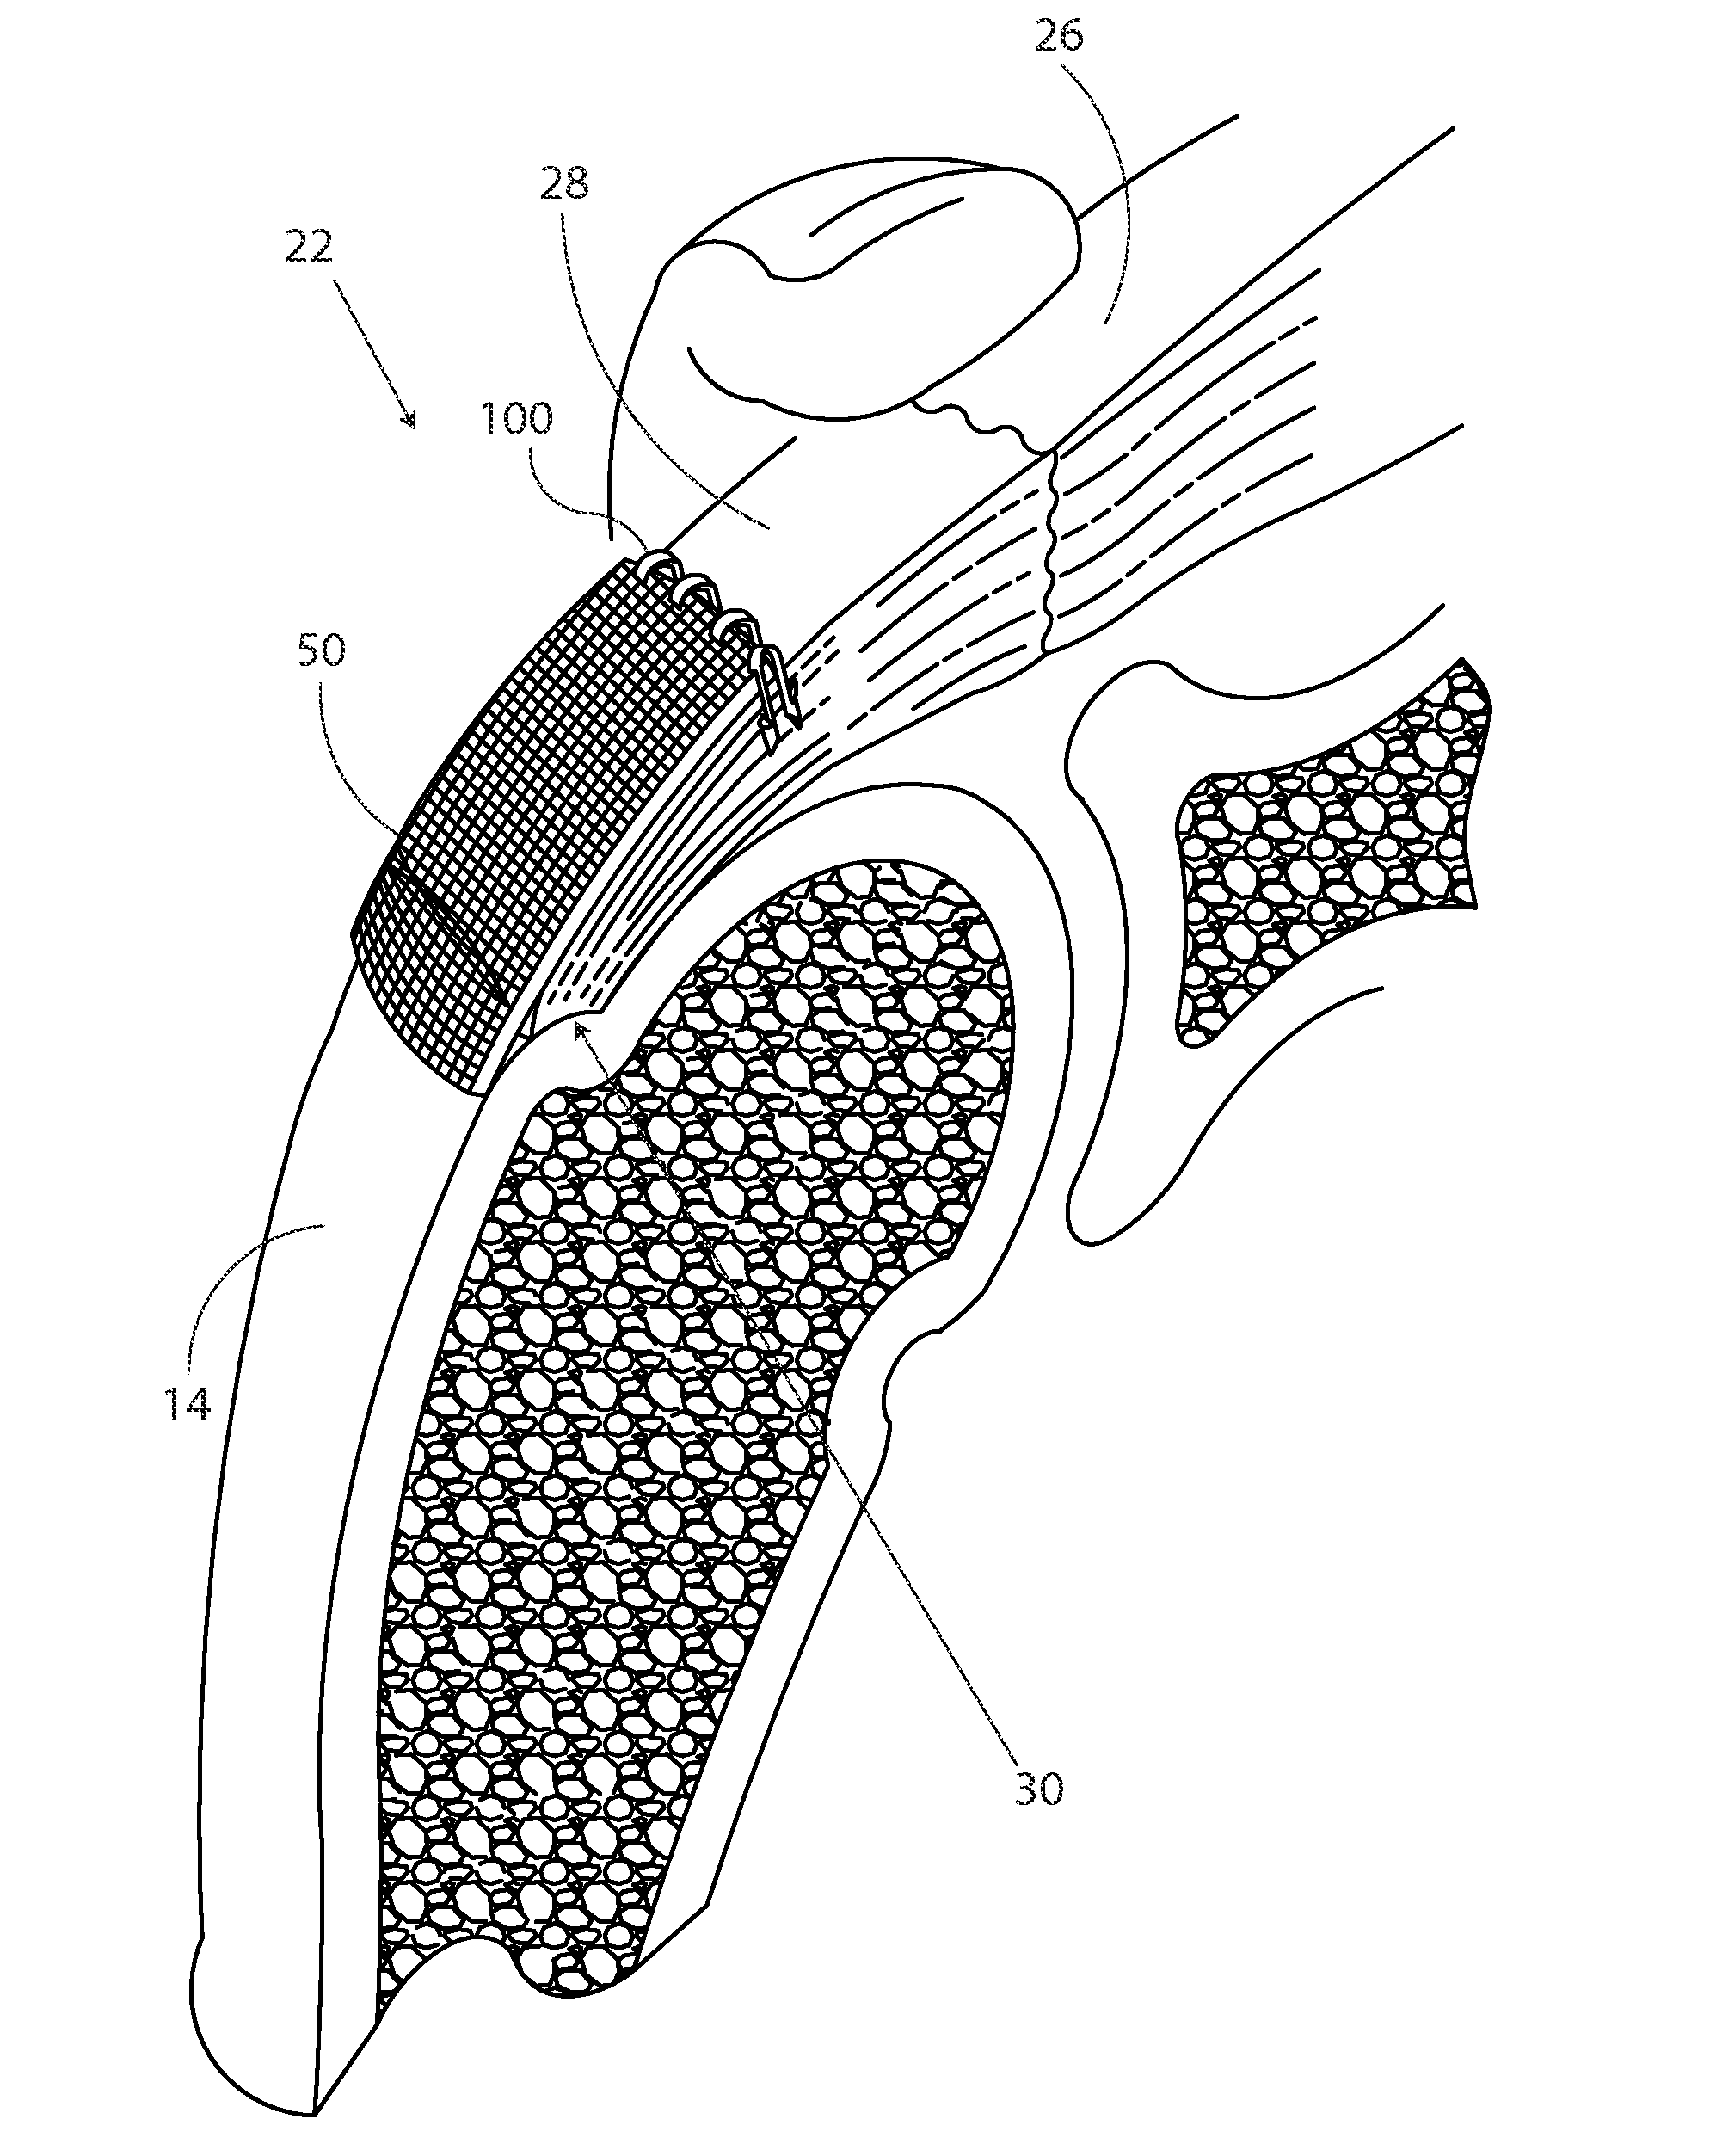 Methods and apparatus for fixing sheet-like materials to a target tissue